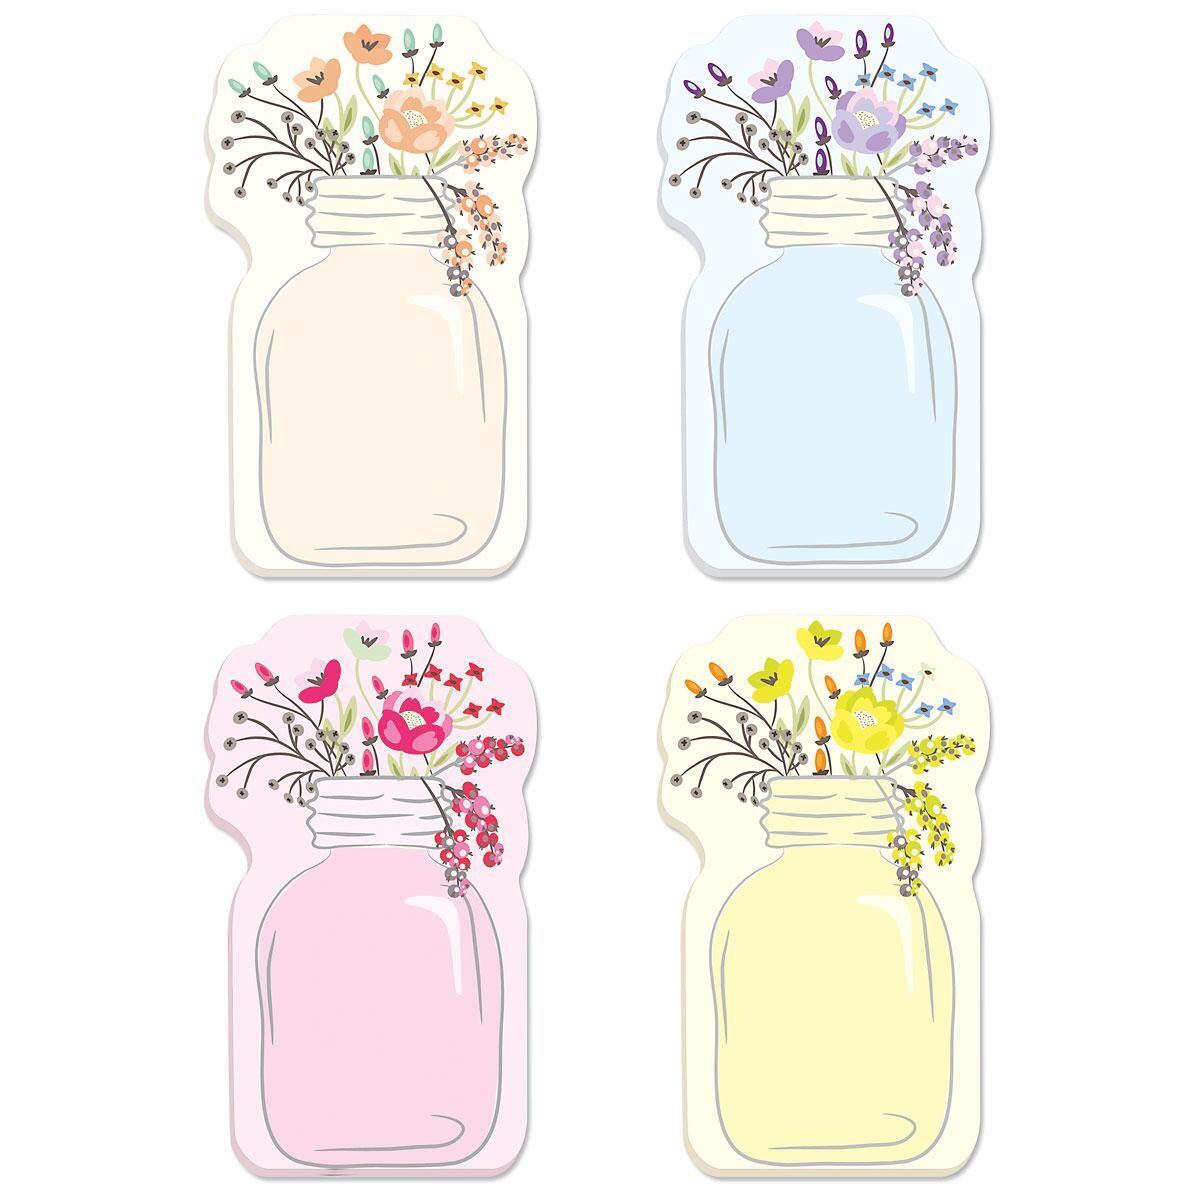 stop and jot clipart flowers